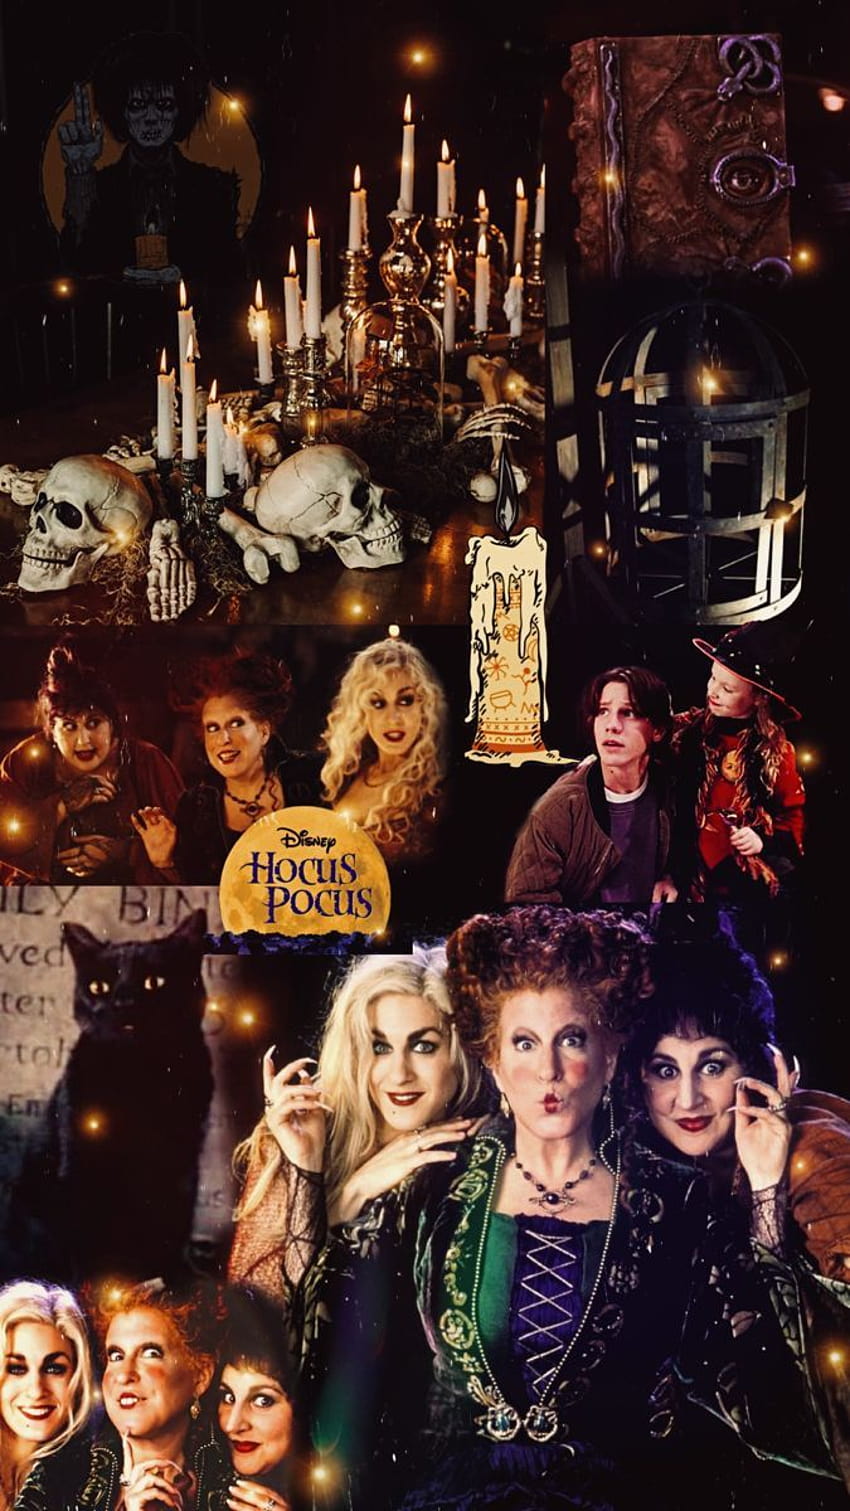 Hocus pocus collage backgrounds, aesthetic college disney movies HD phone wallpaper